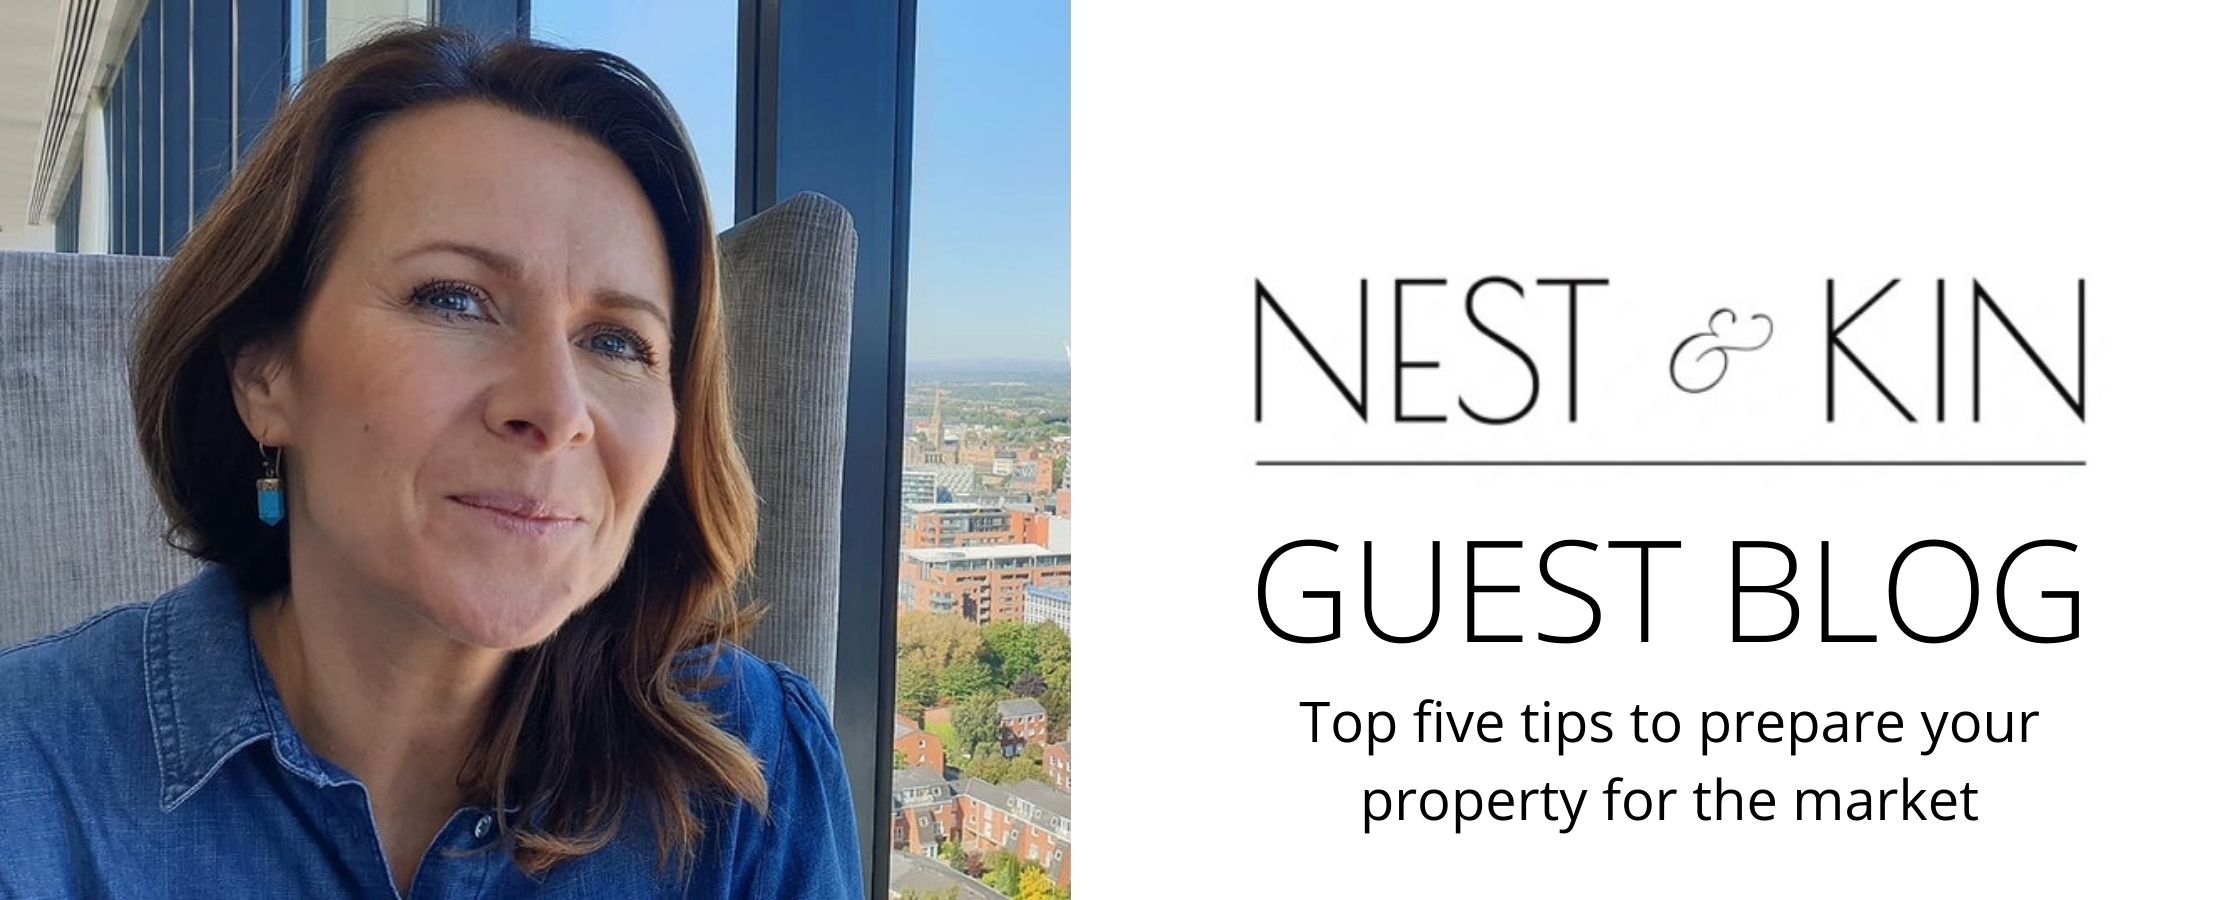 Guest blog: Top five tips to prepare your property for the market